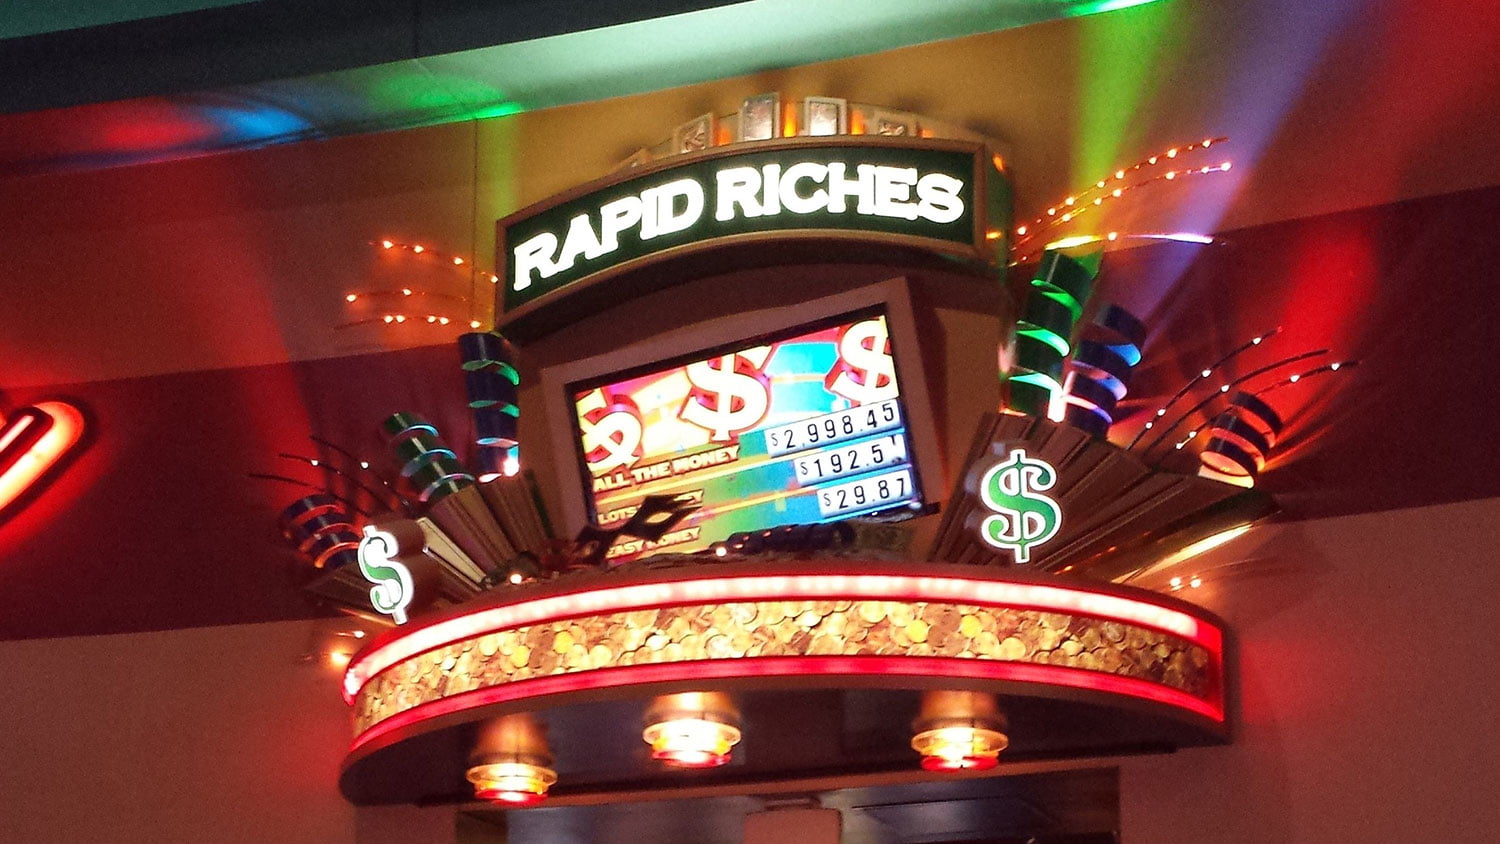 Rapid Riches custom themed sign with tv screens